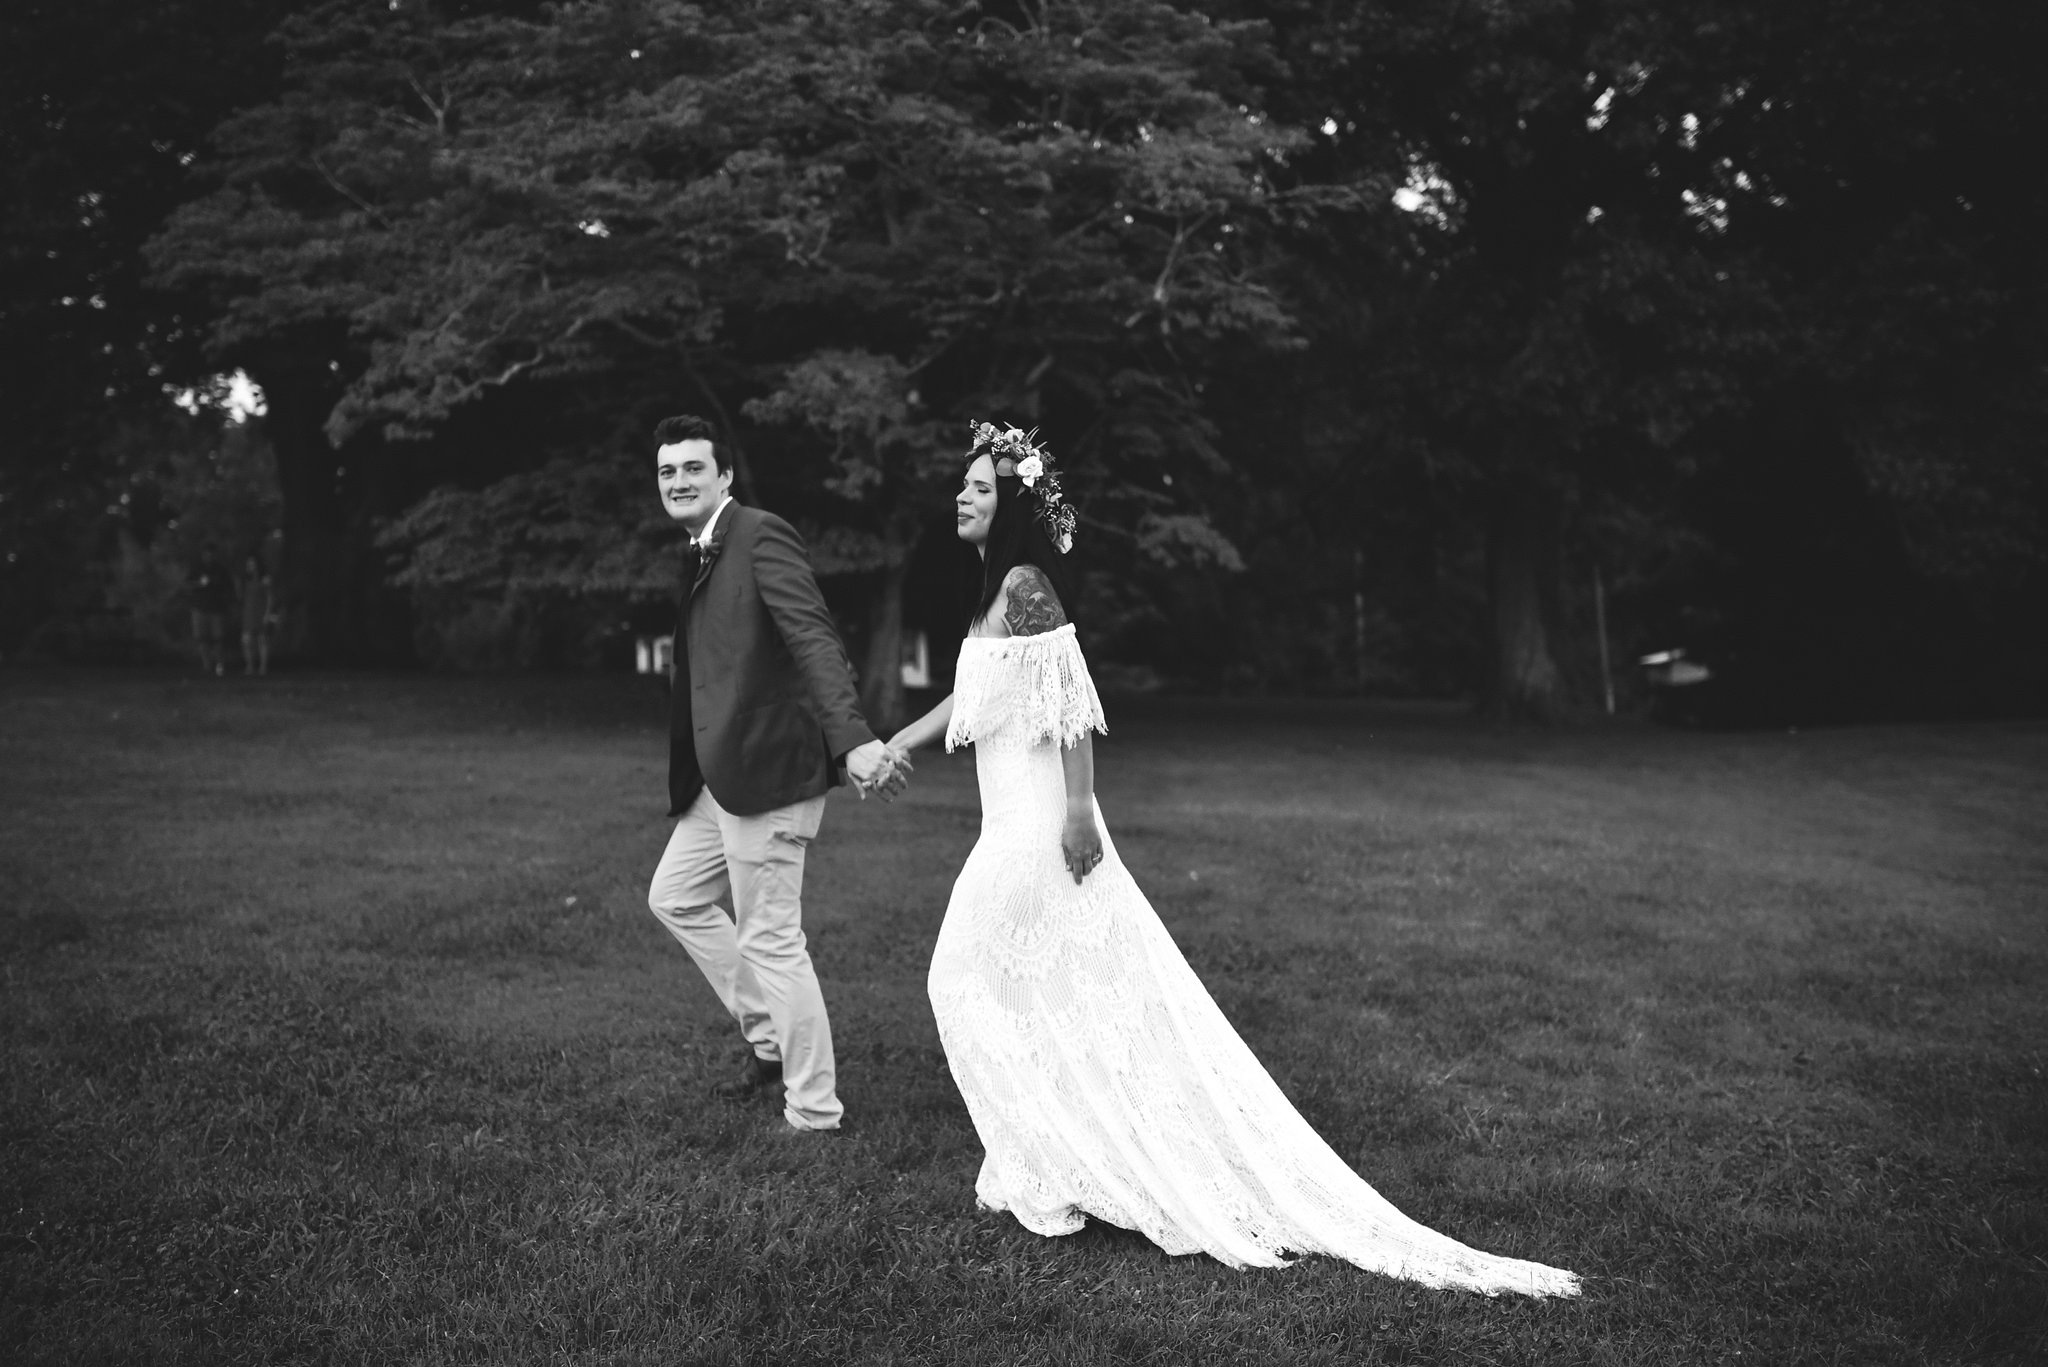  Maryland, Eastern Shore, Baltimore Wedding Photographer, Romantic, Boho, Backyard Wedding, Nature, Black and White Photo, Bride and Groom Holding Hands and Walking Through Field, Outdoor Reception, Daughters of Simone Wedding Dress 